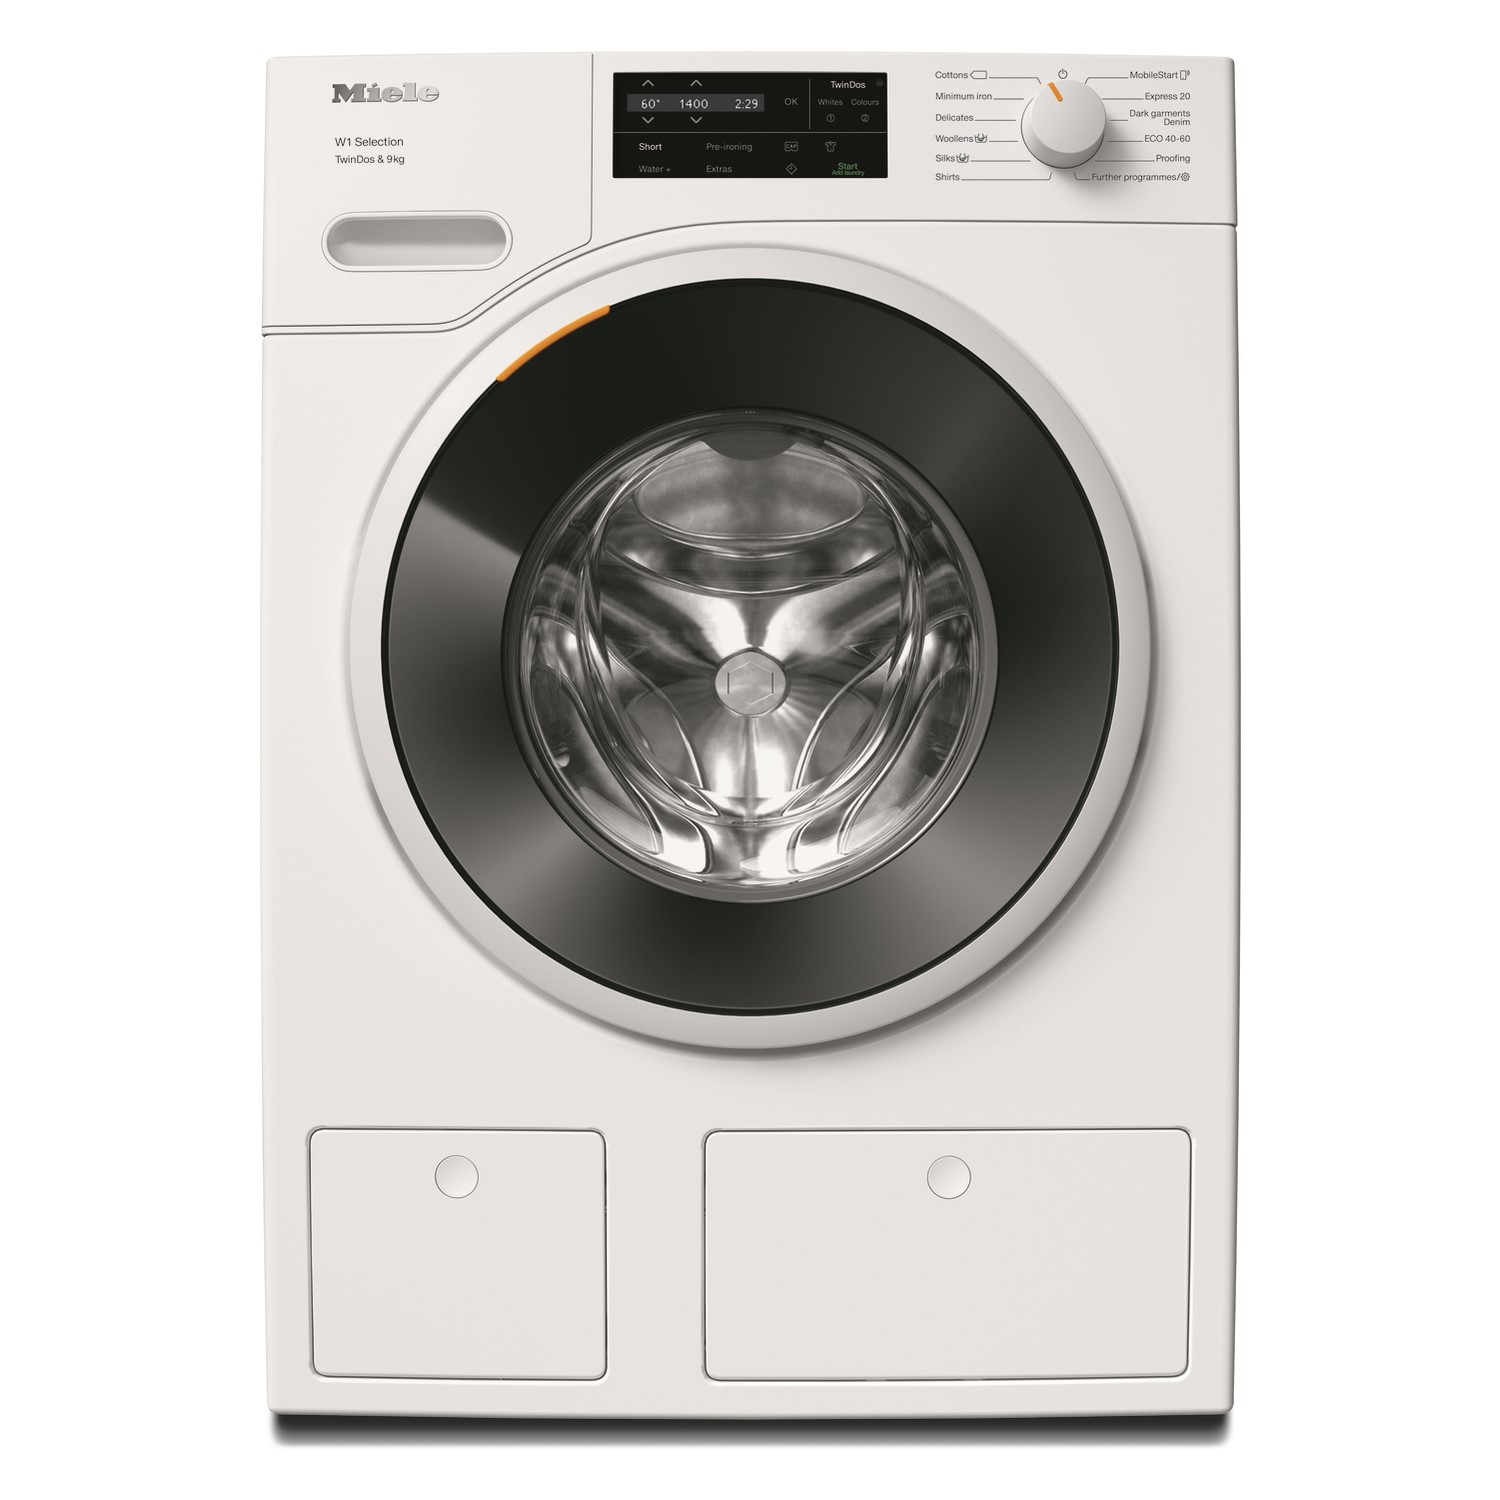 Miele W1 WSG663 Wifi Connected 9Kg Washing Machine with 1400 rpm - White - A Rated